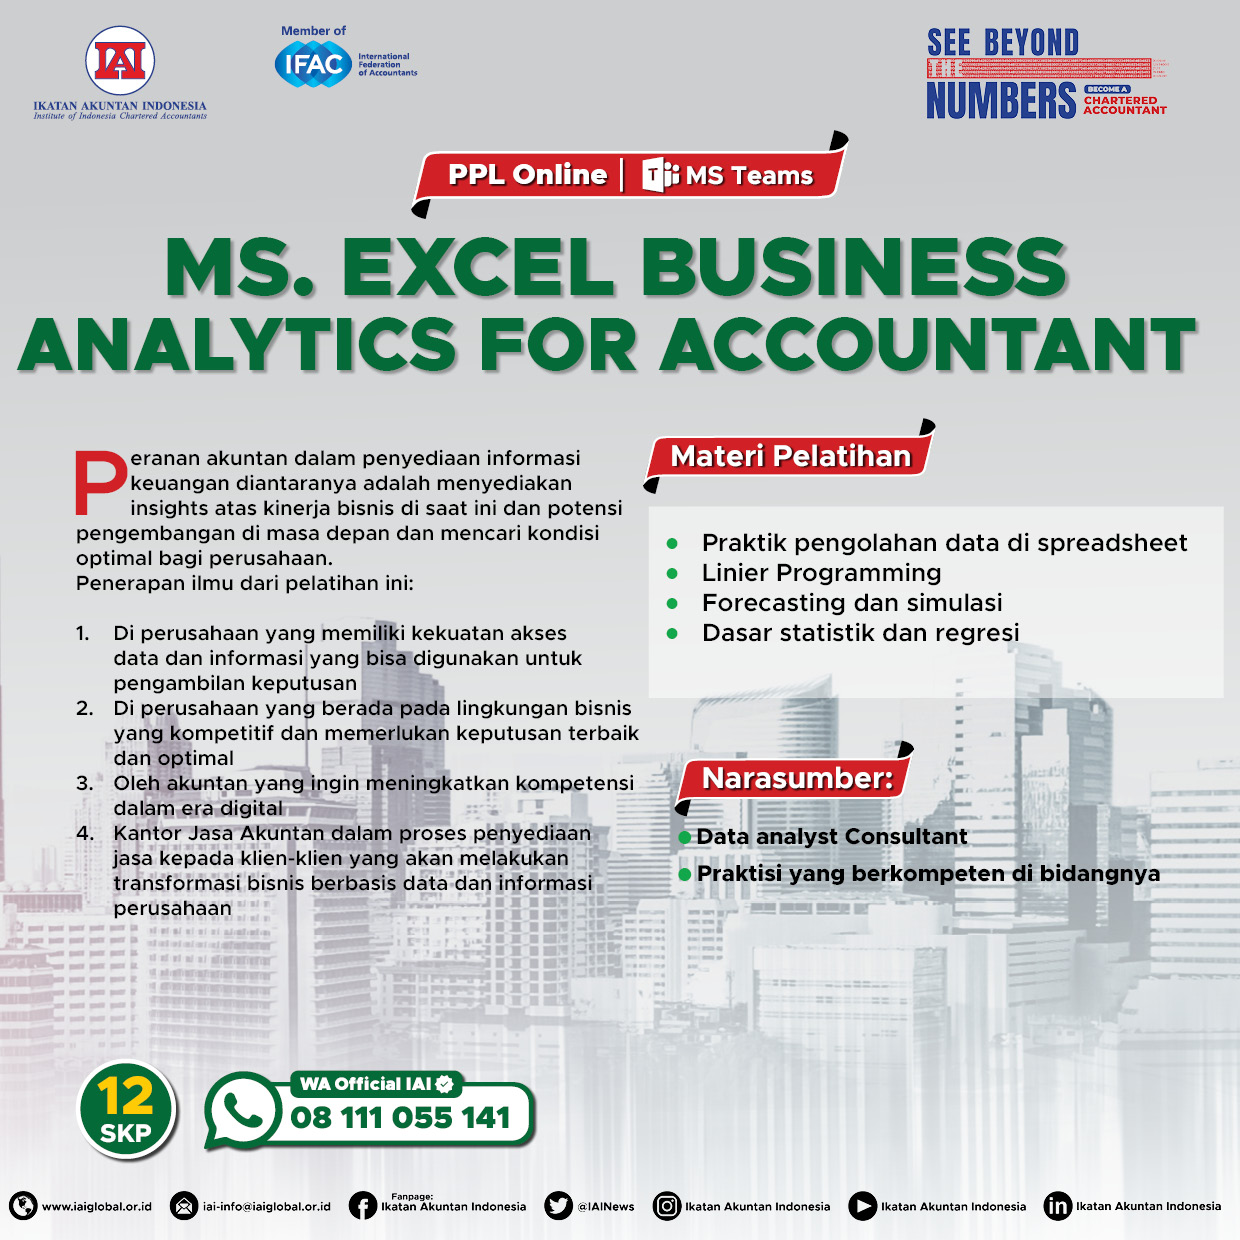 Ms. Excel Business Analytics for Accountant